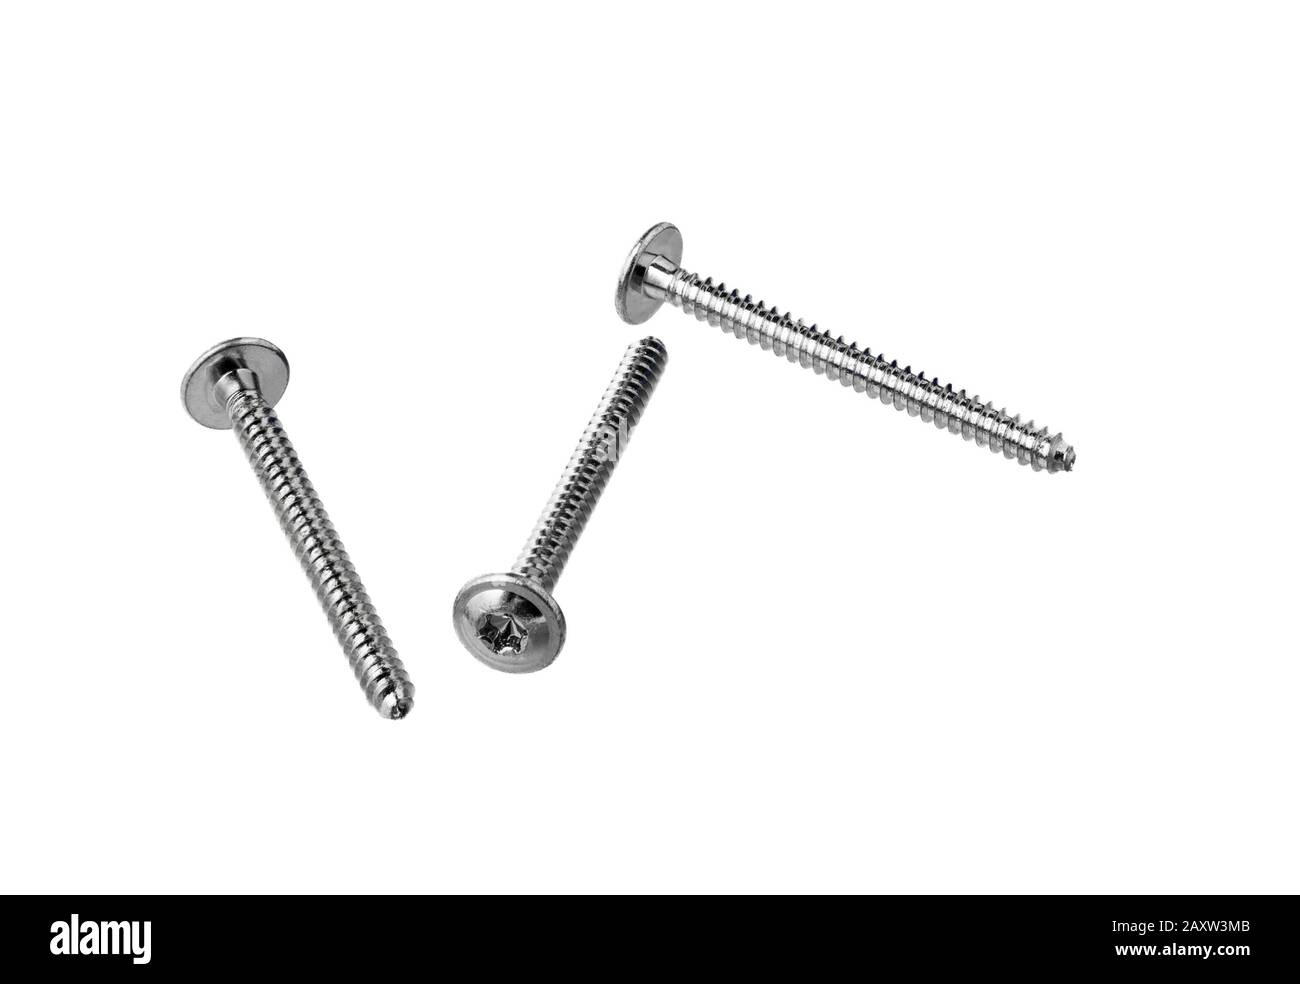 Screws isolated on white background. Metal fastening. Stock Photo